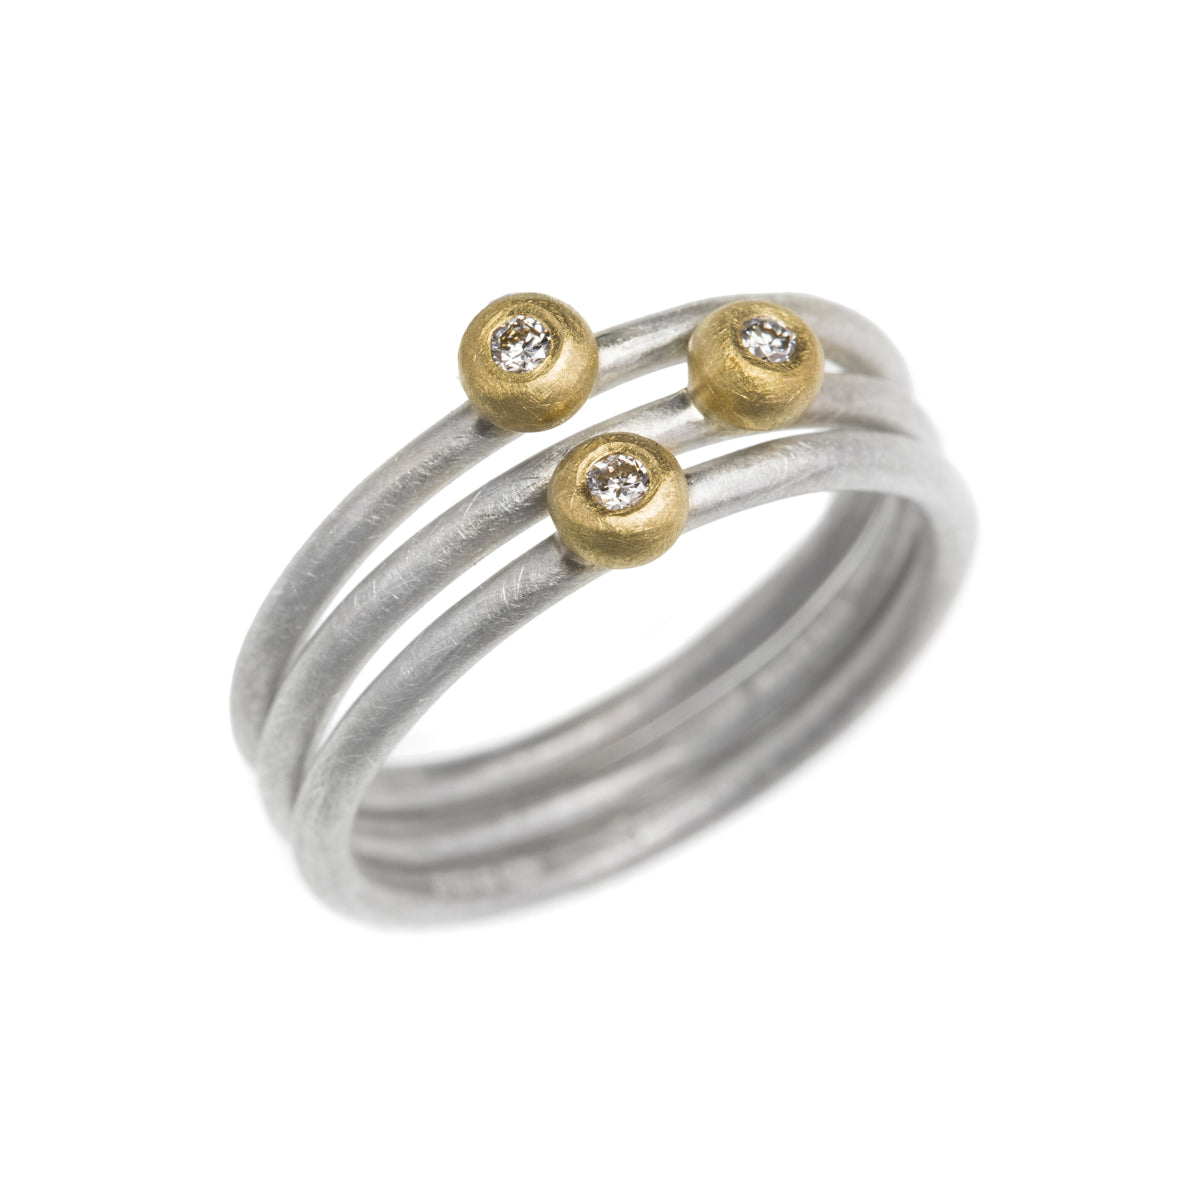 Silver, 18ct Gold Stacking Rings